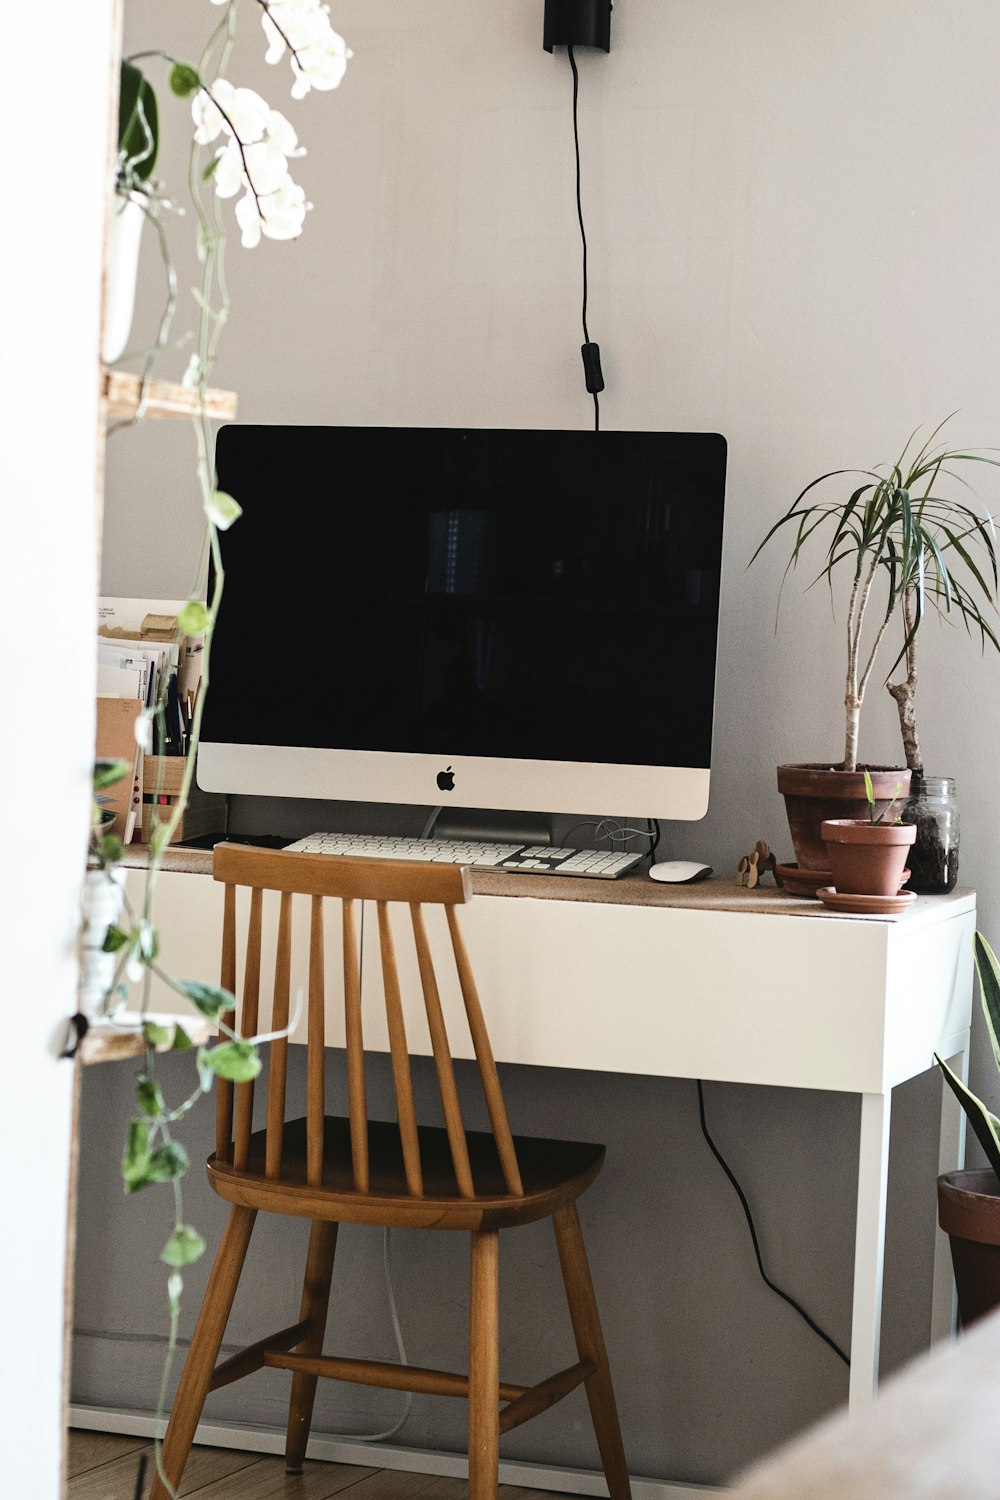 silver imac on brown wooden table